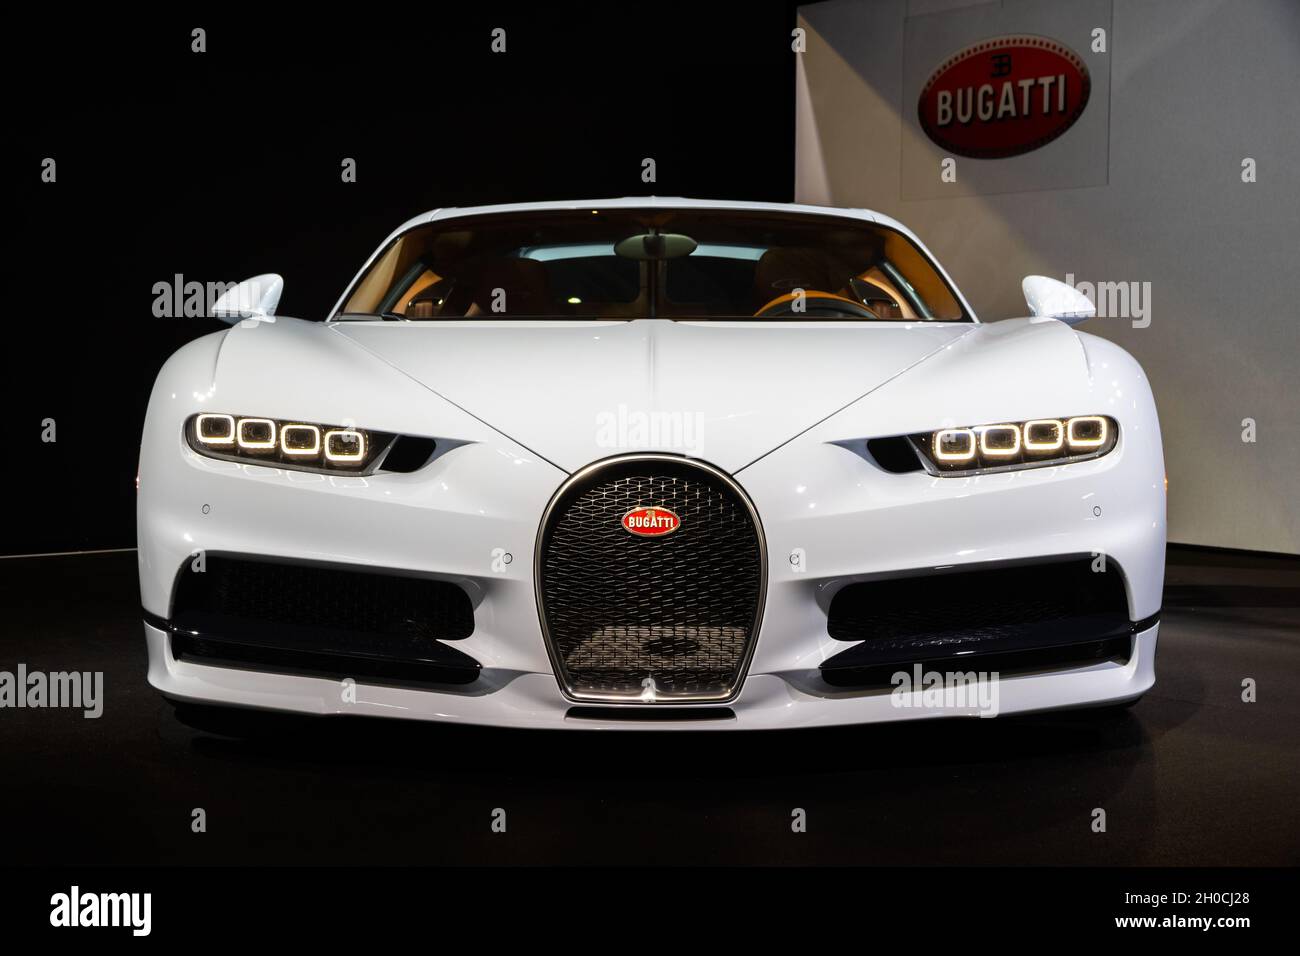 Bugatti Chiron 8.0 W16 DSG Sequential sports car showcased at the Paris Motor Show. October 2, 2018 Stock Photo